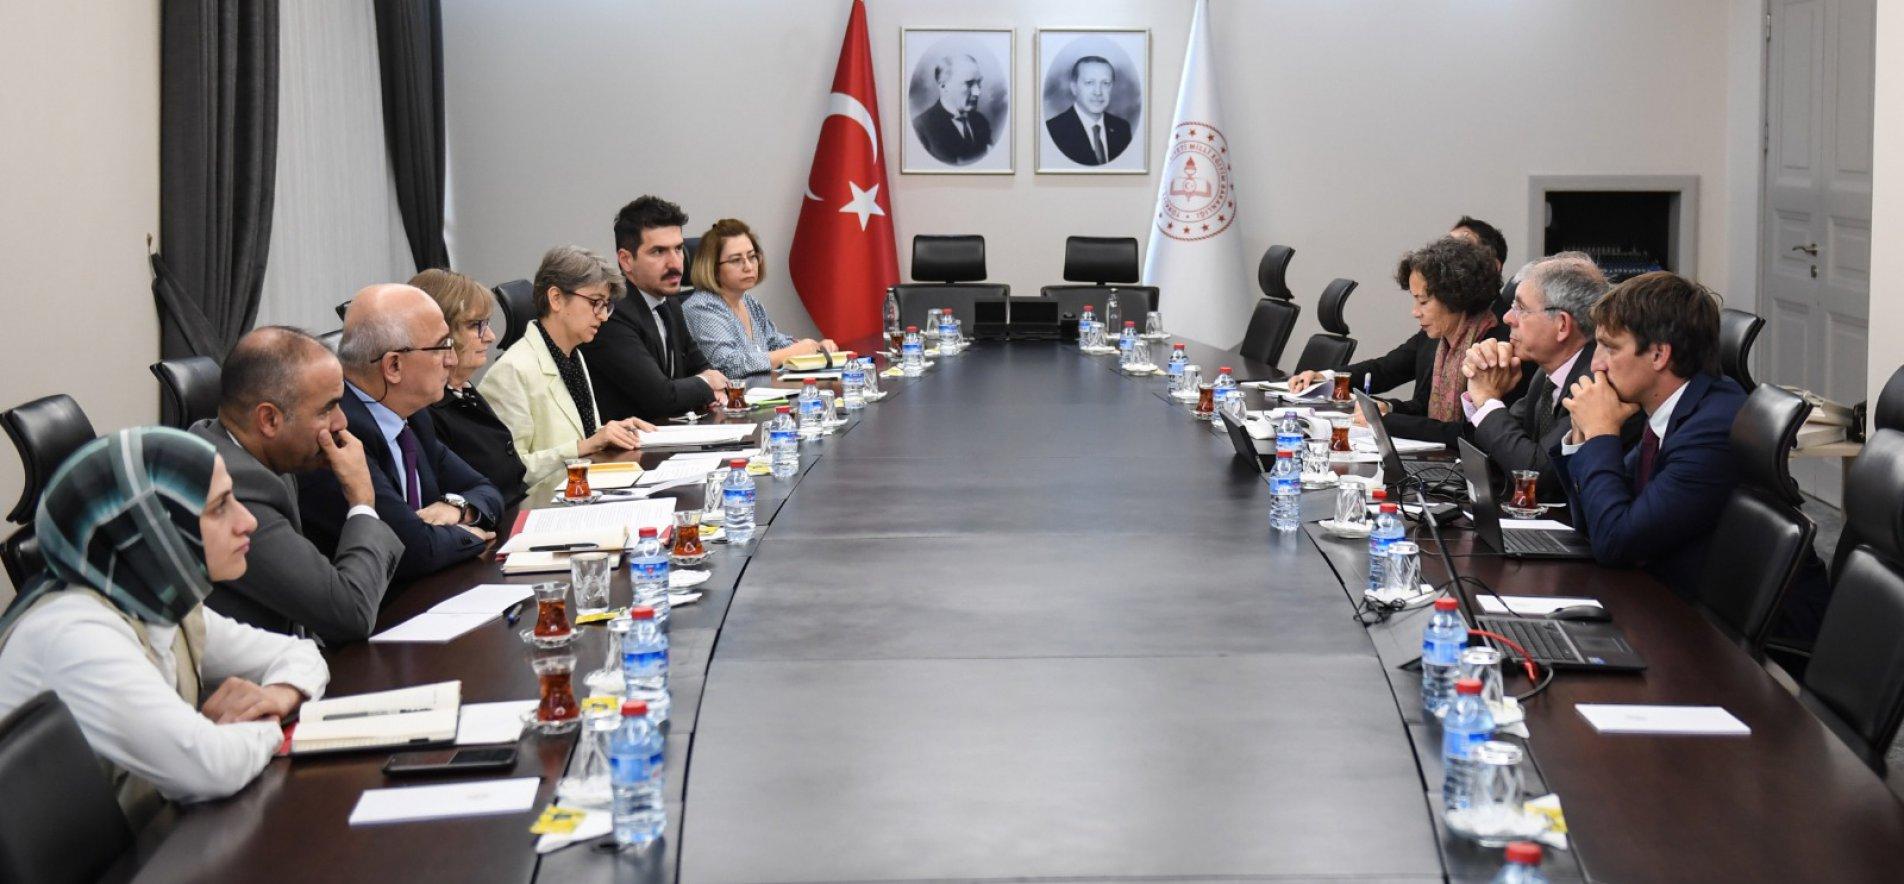 DEPUTY MINISTERS OF NATIONAL EDUCATION GOT TOGETHER WITH THE OECD DELEGATION